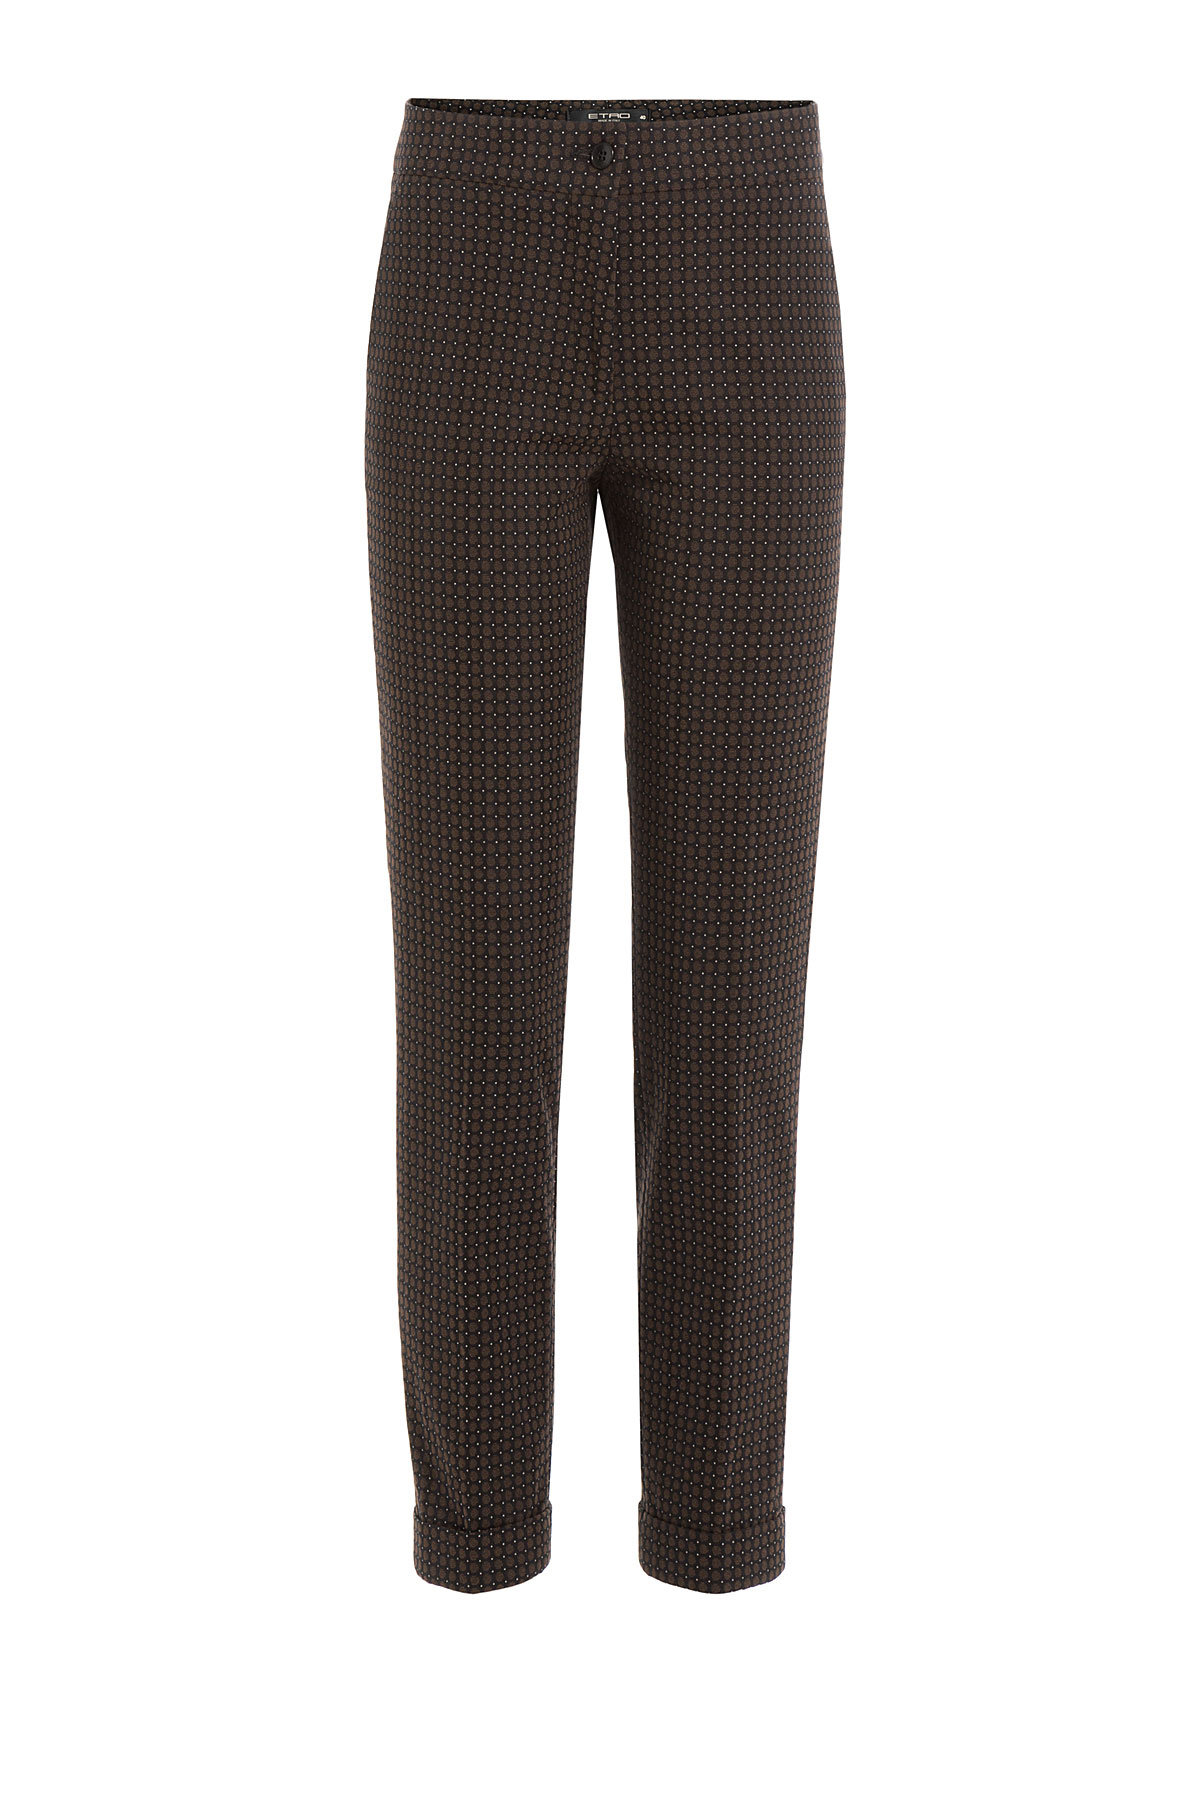 Etro - Cropped Printed Cotton Pants